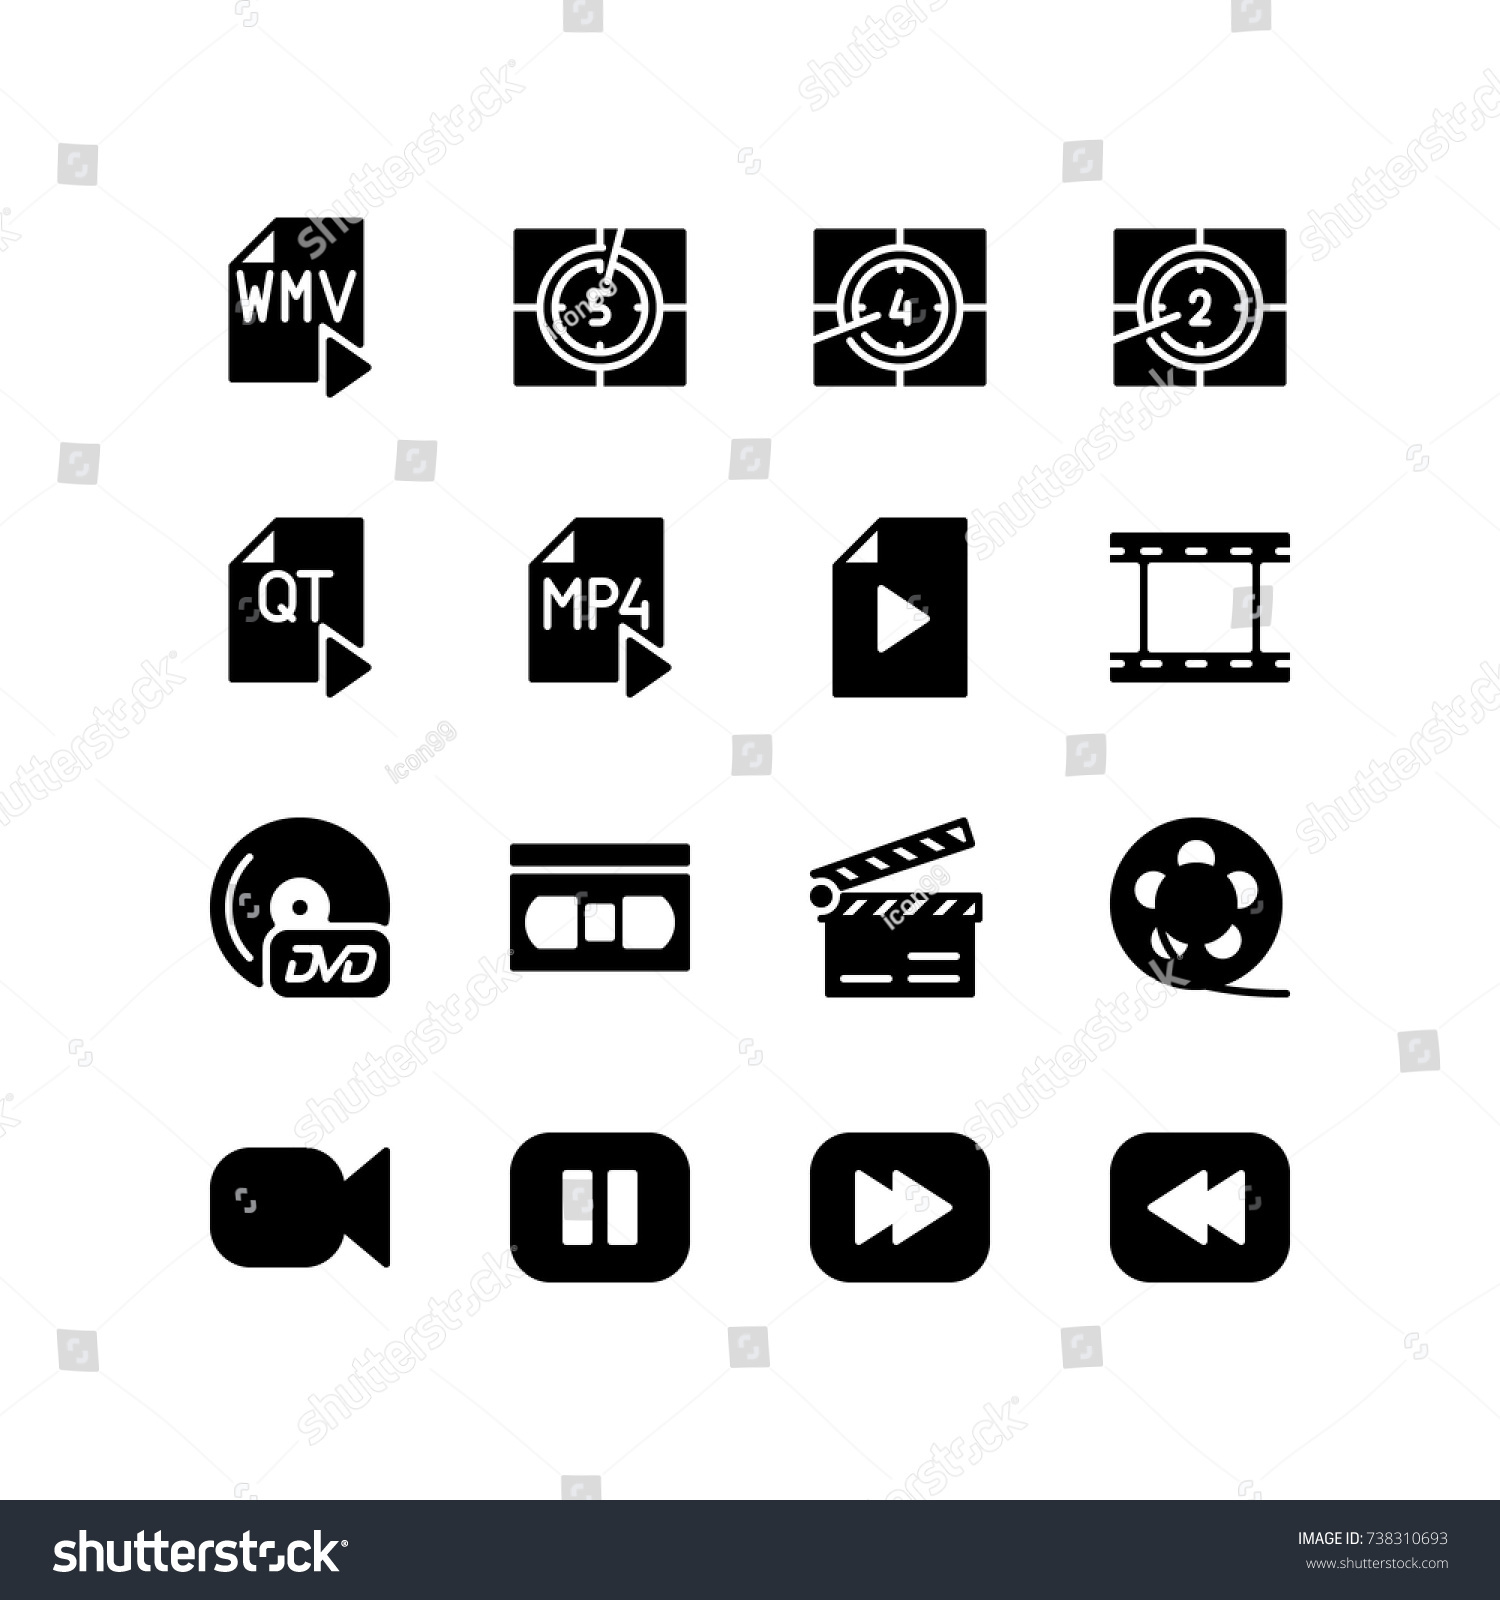 Film Countdown Timer File Format Icon Stock Vector 738310693 